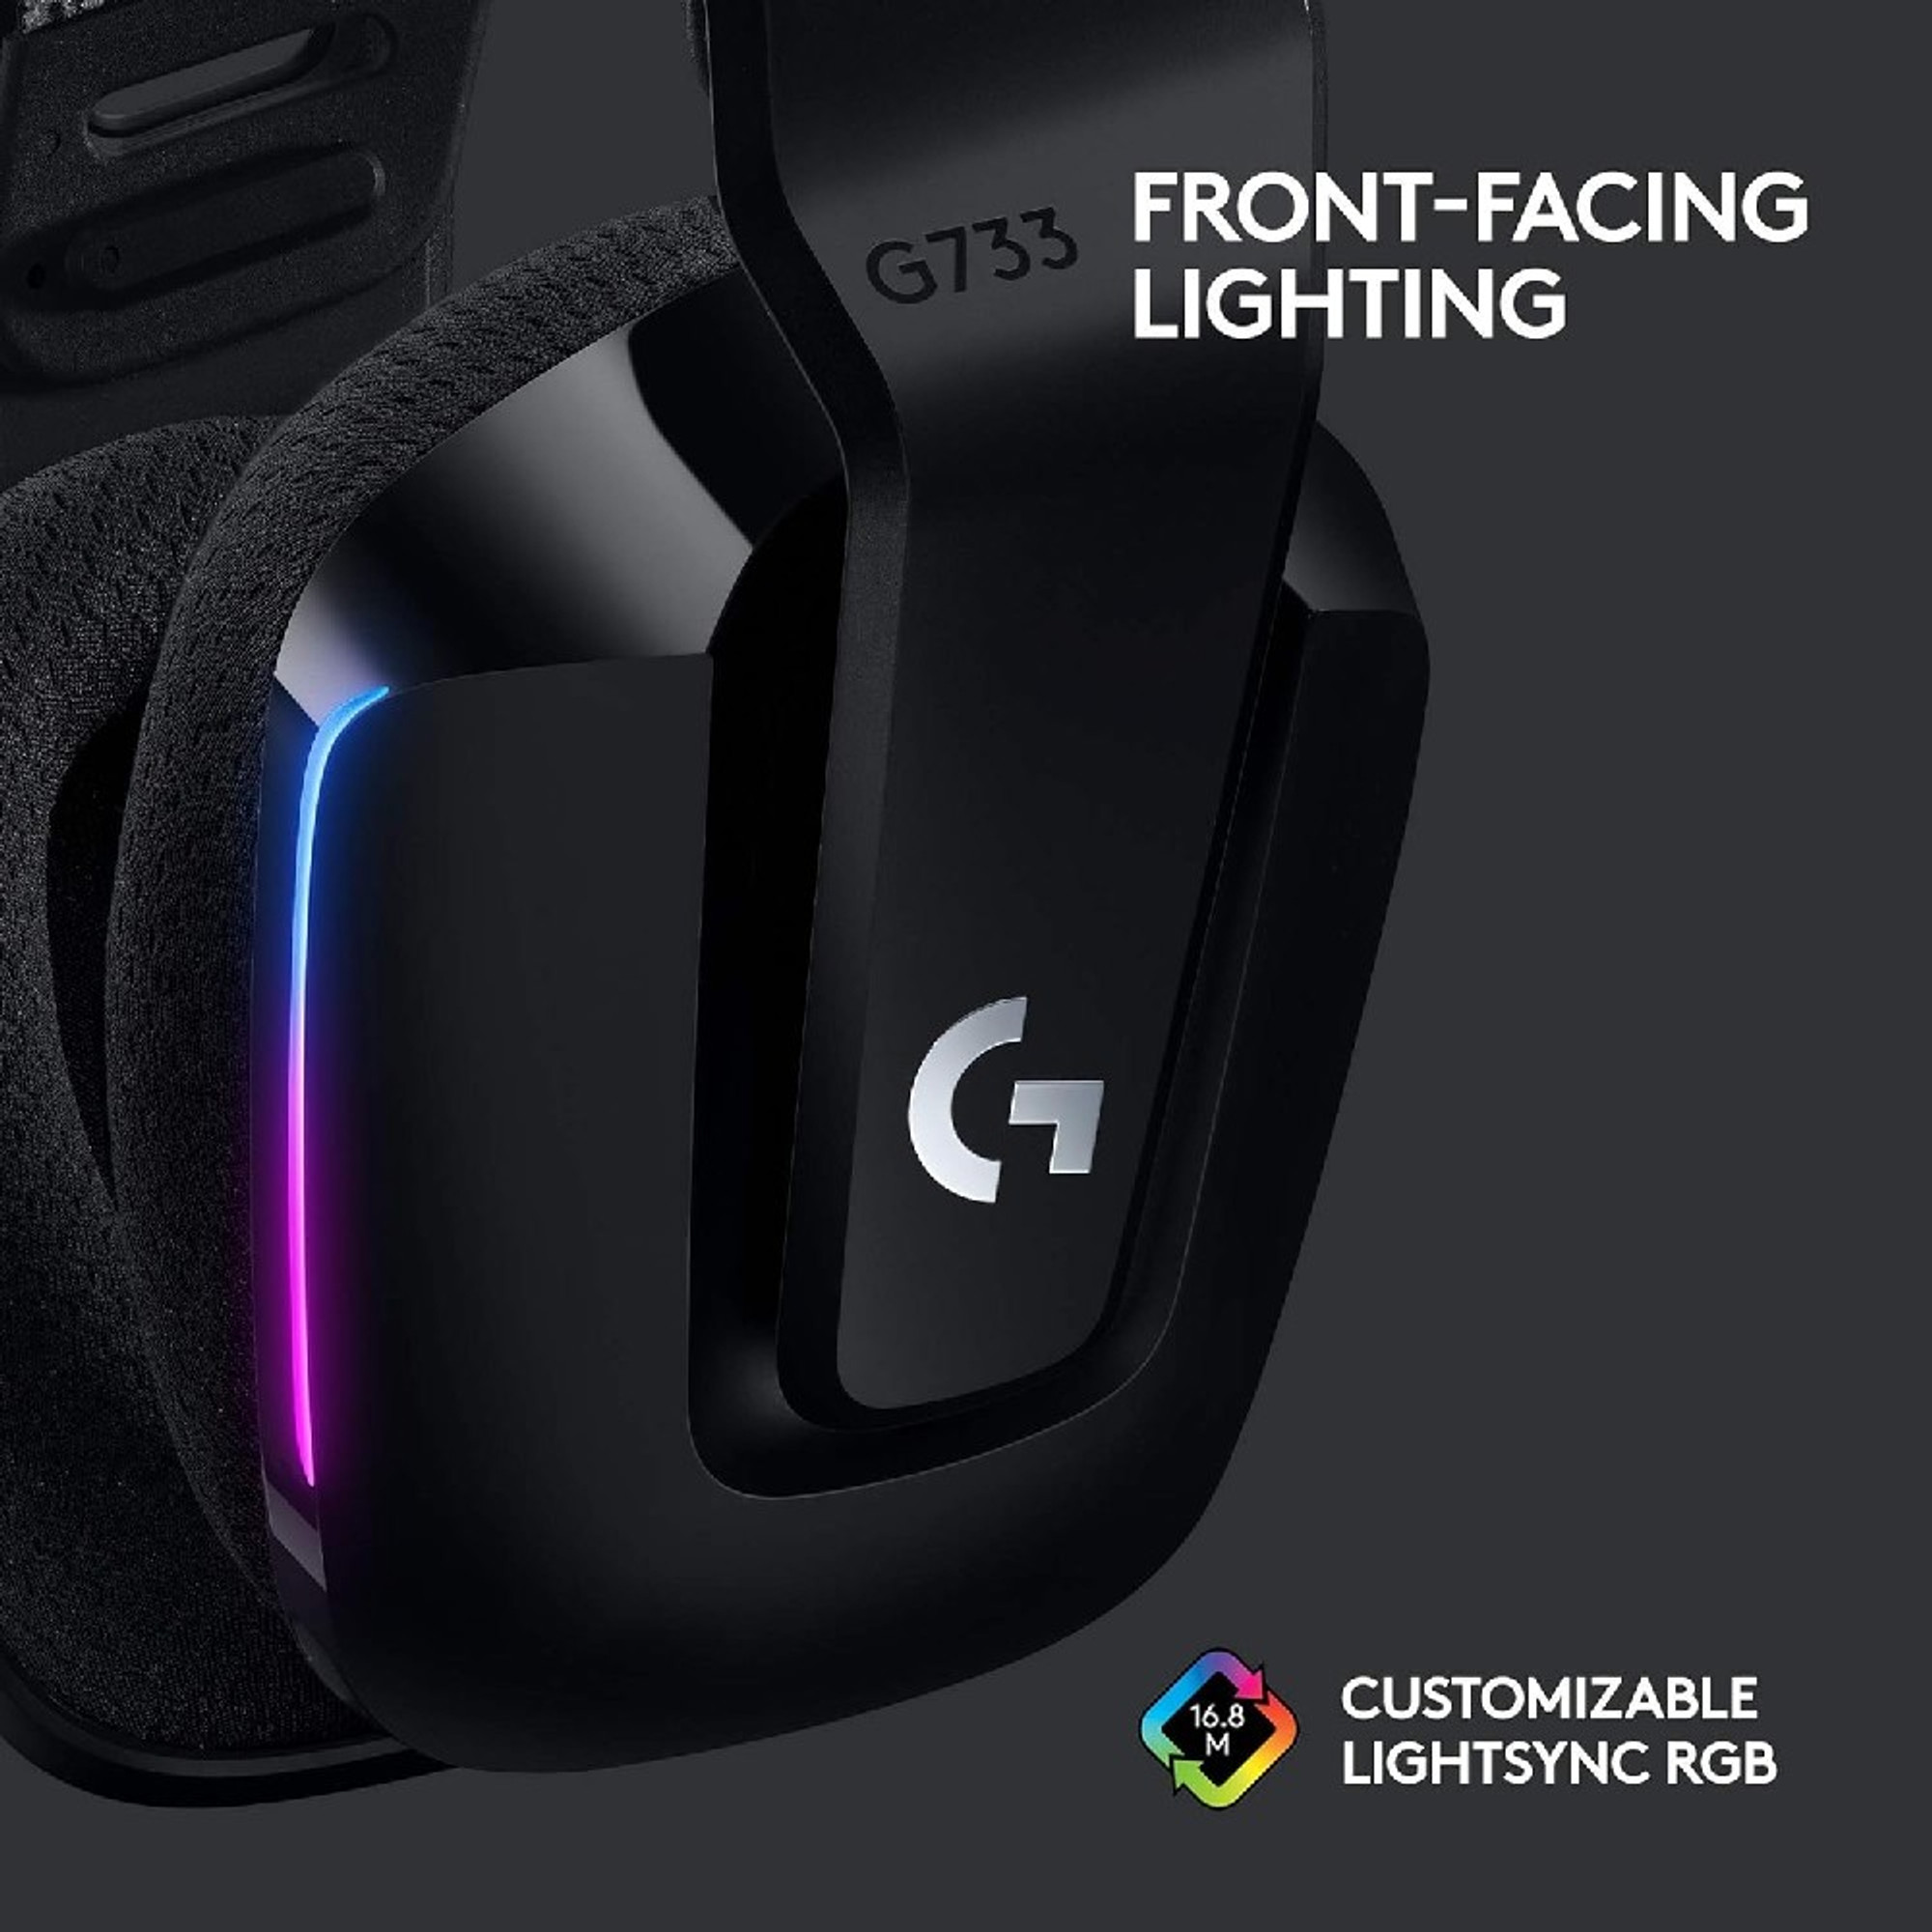 Logitech G733 LIGHTSPEED Wireless RGB Gaming Headset PRO-G DTS Headphone X  2.0 surround sound Suitable for computer gamers